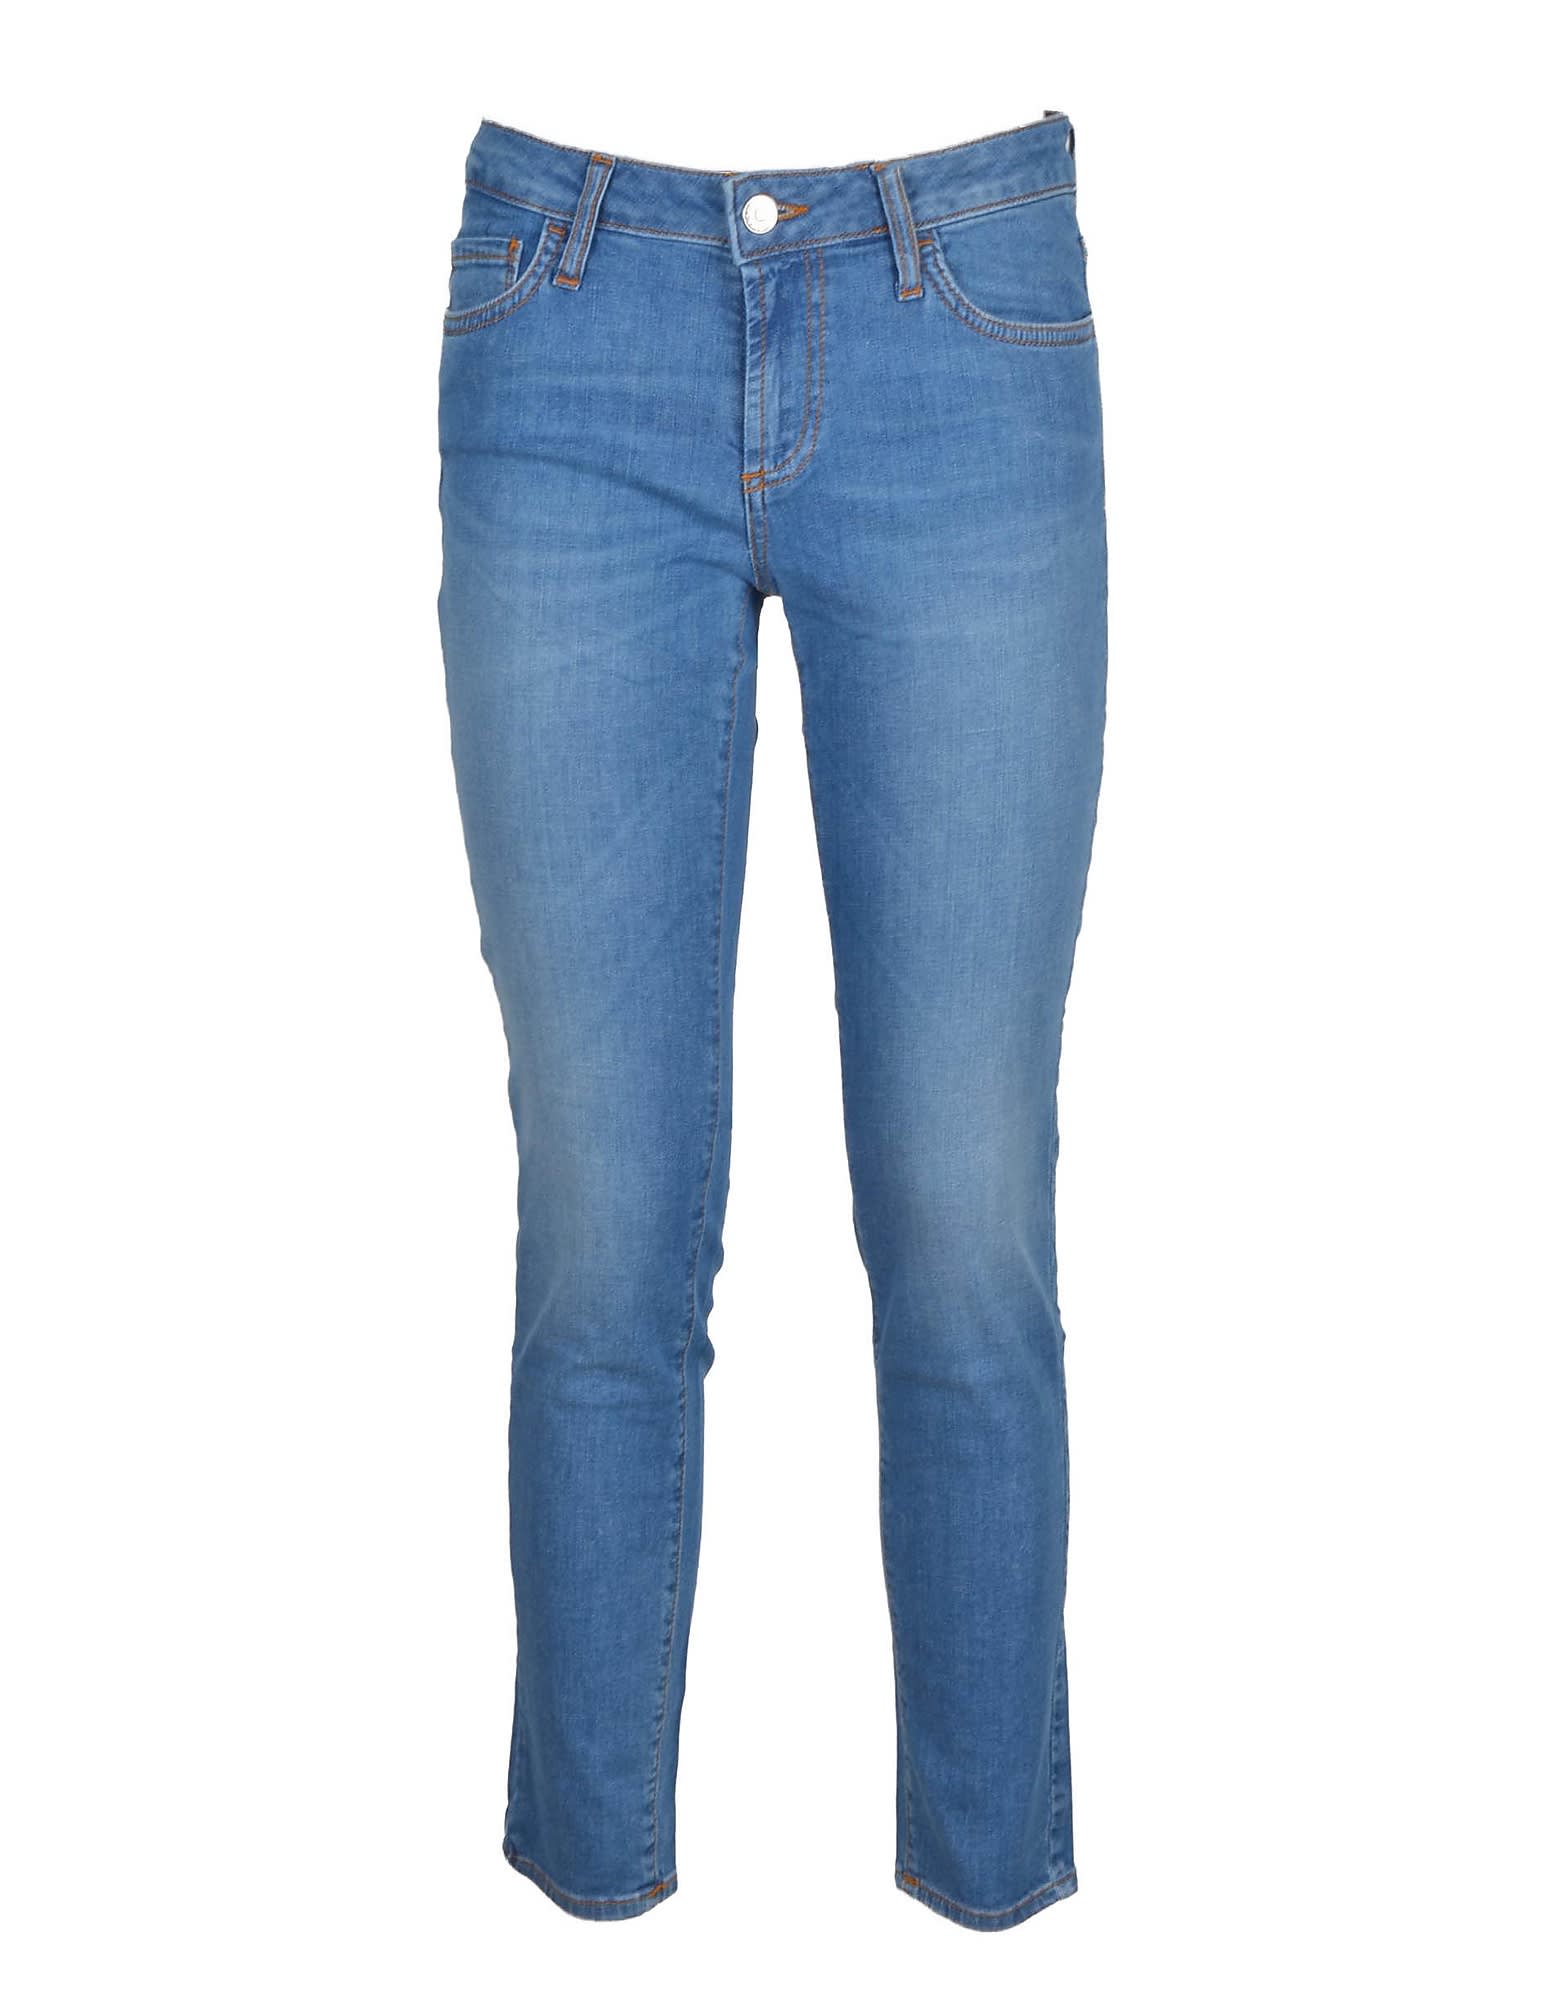 Roy Rogers Womens Blue Jeans